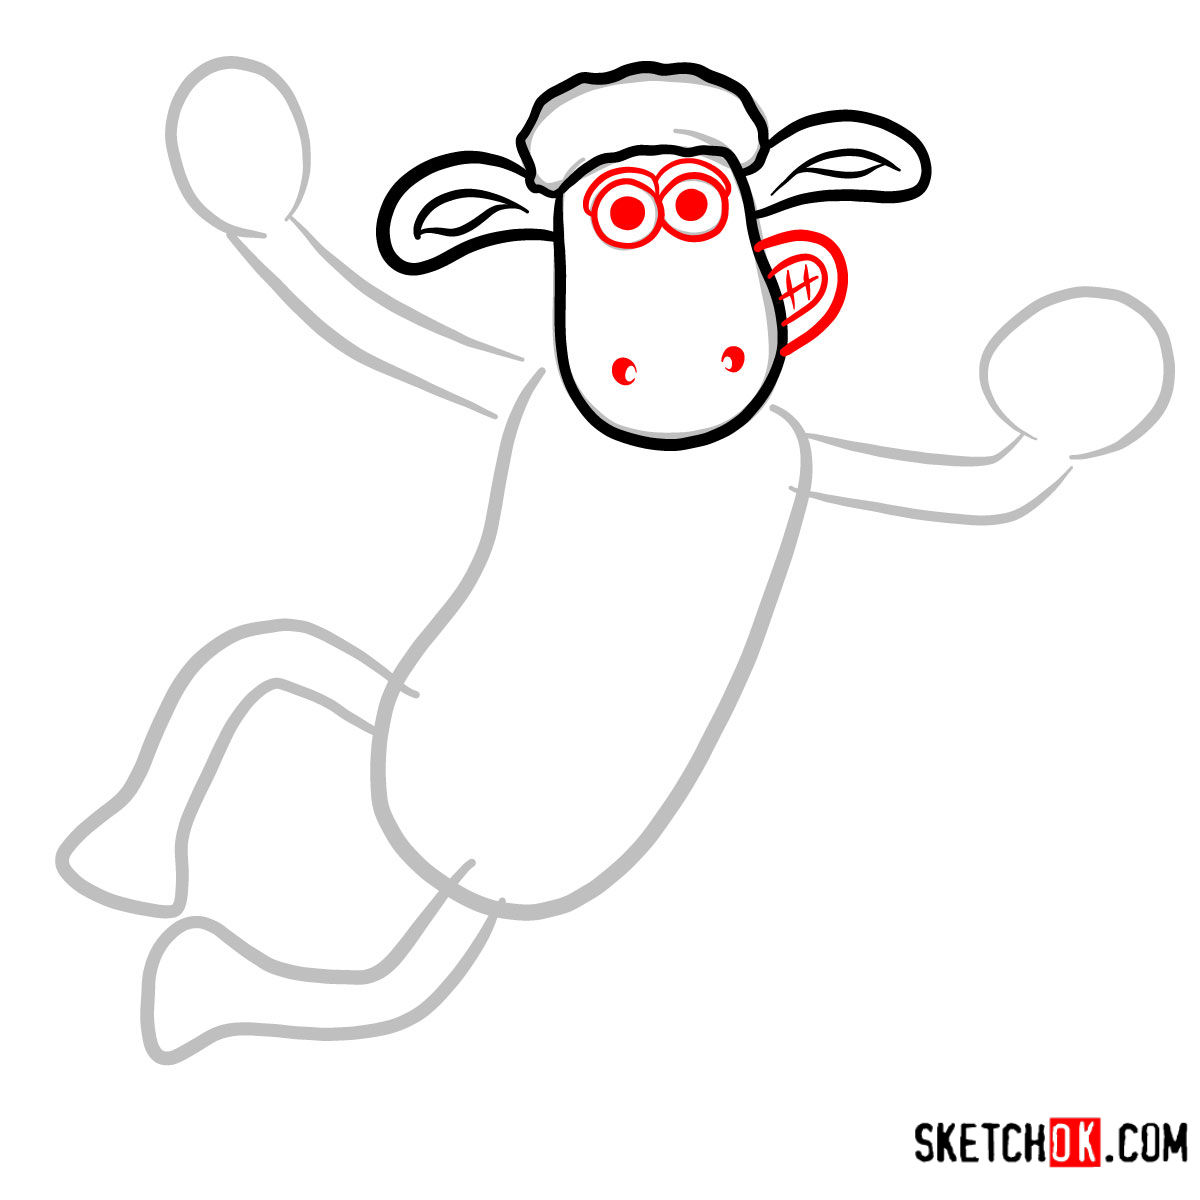 How to draw Shaun the Sheep - step 03